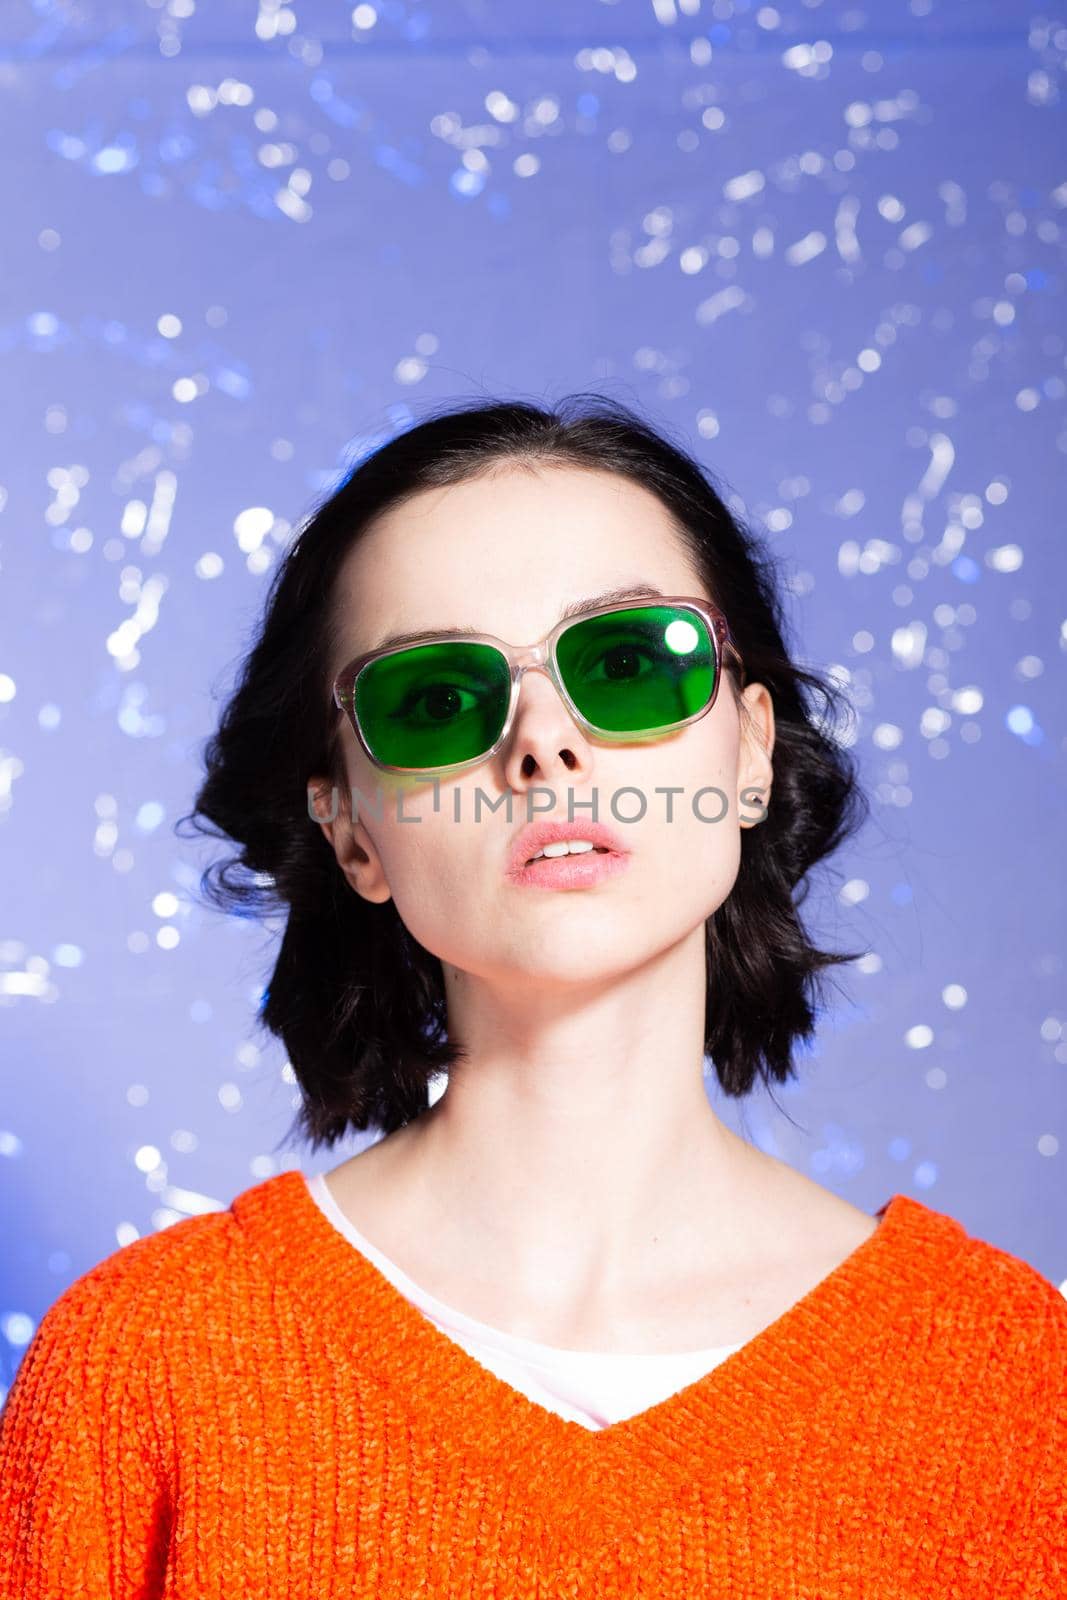 beautiful girl in an orange sweater and green glasses on a blue background. High quality photo